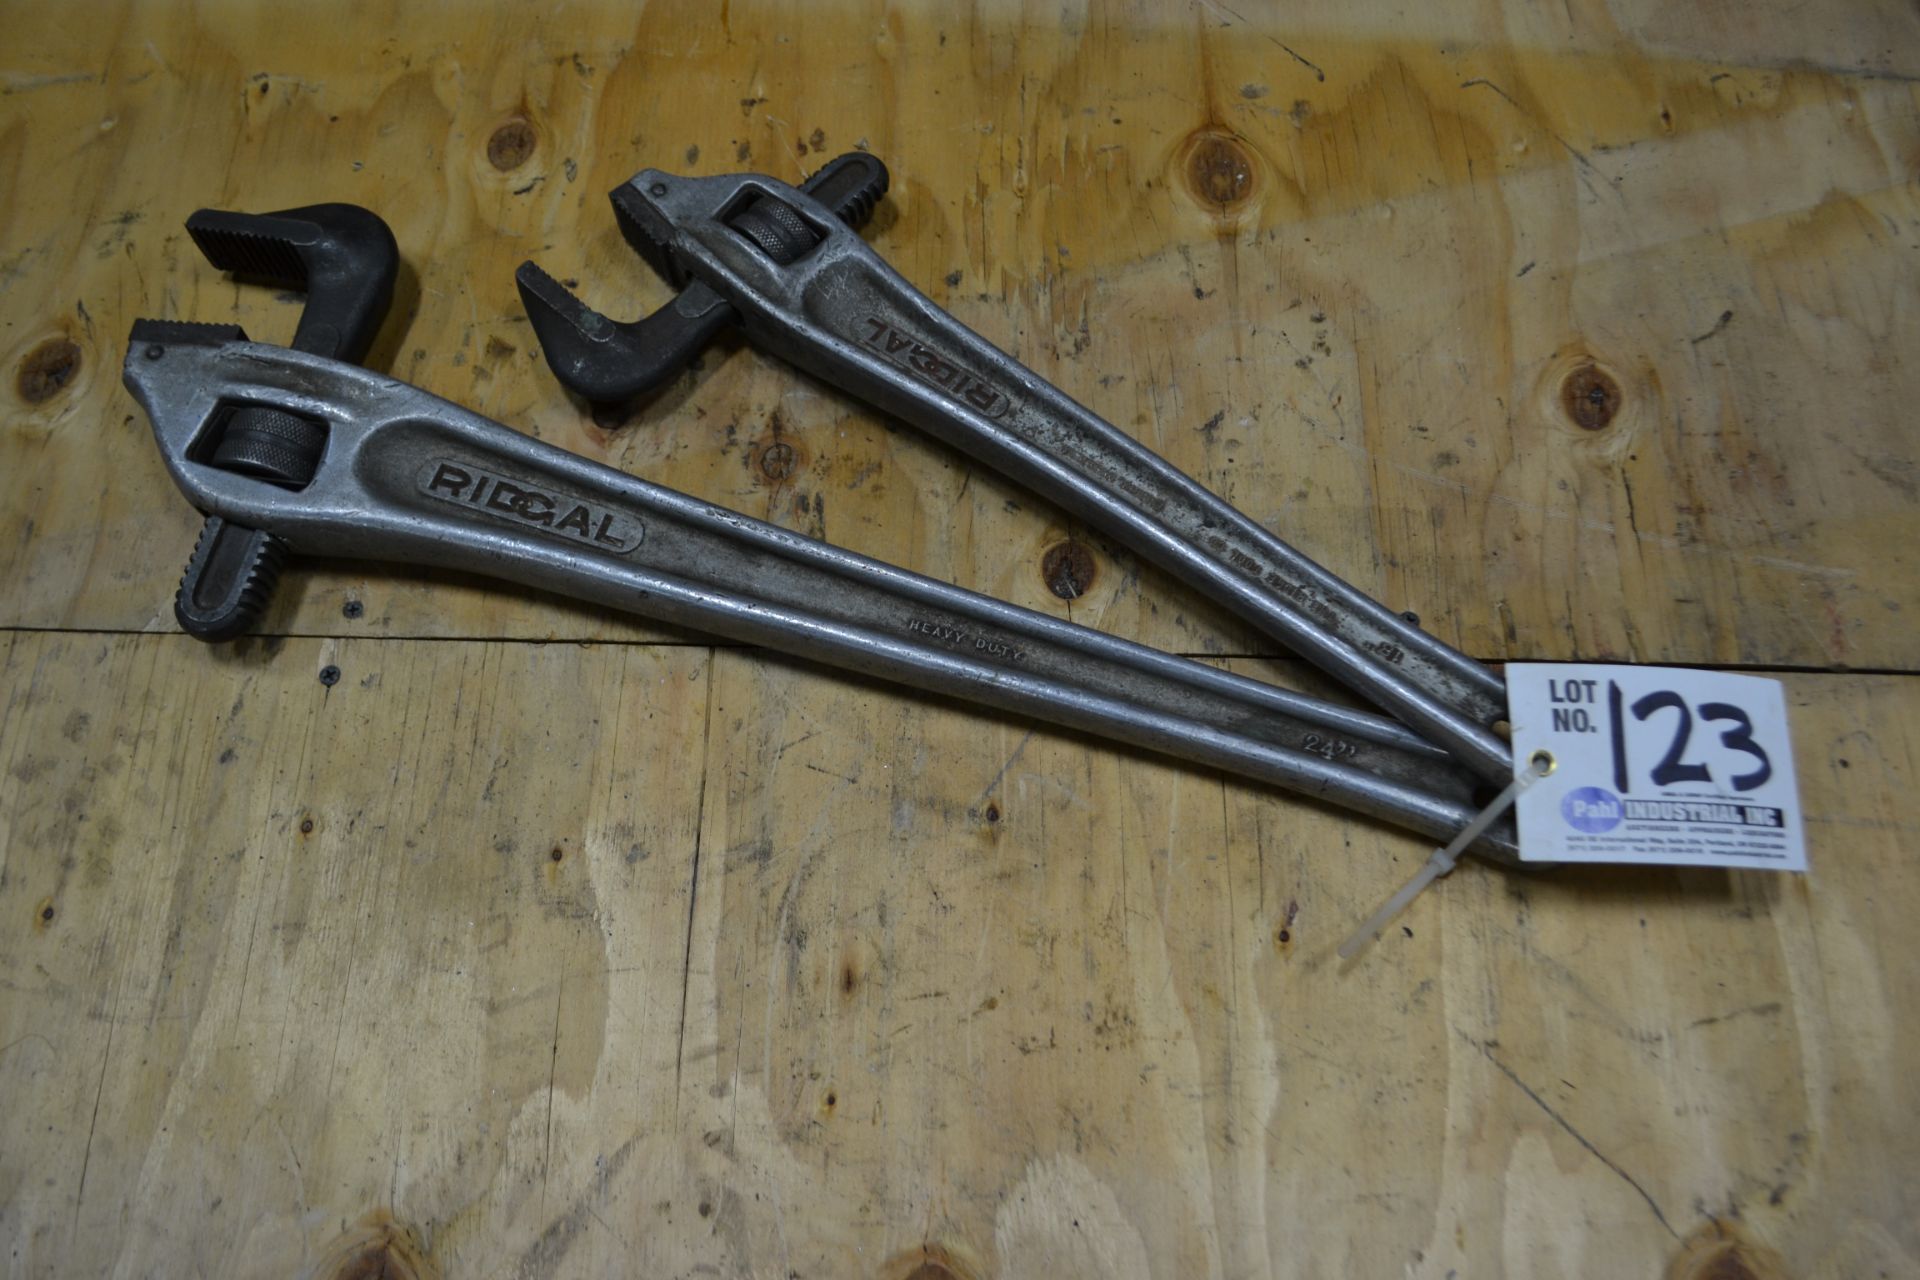 Ridgal 24" and 18" Pipe Wrenches